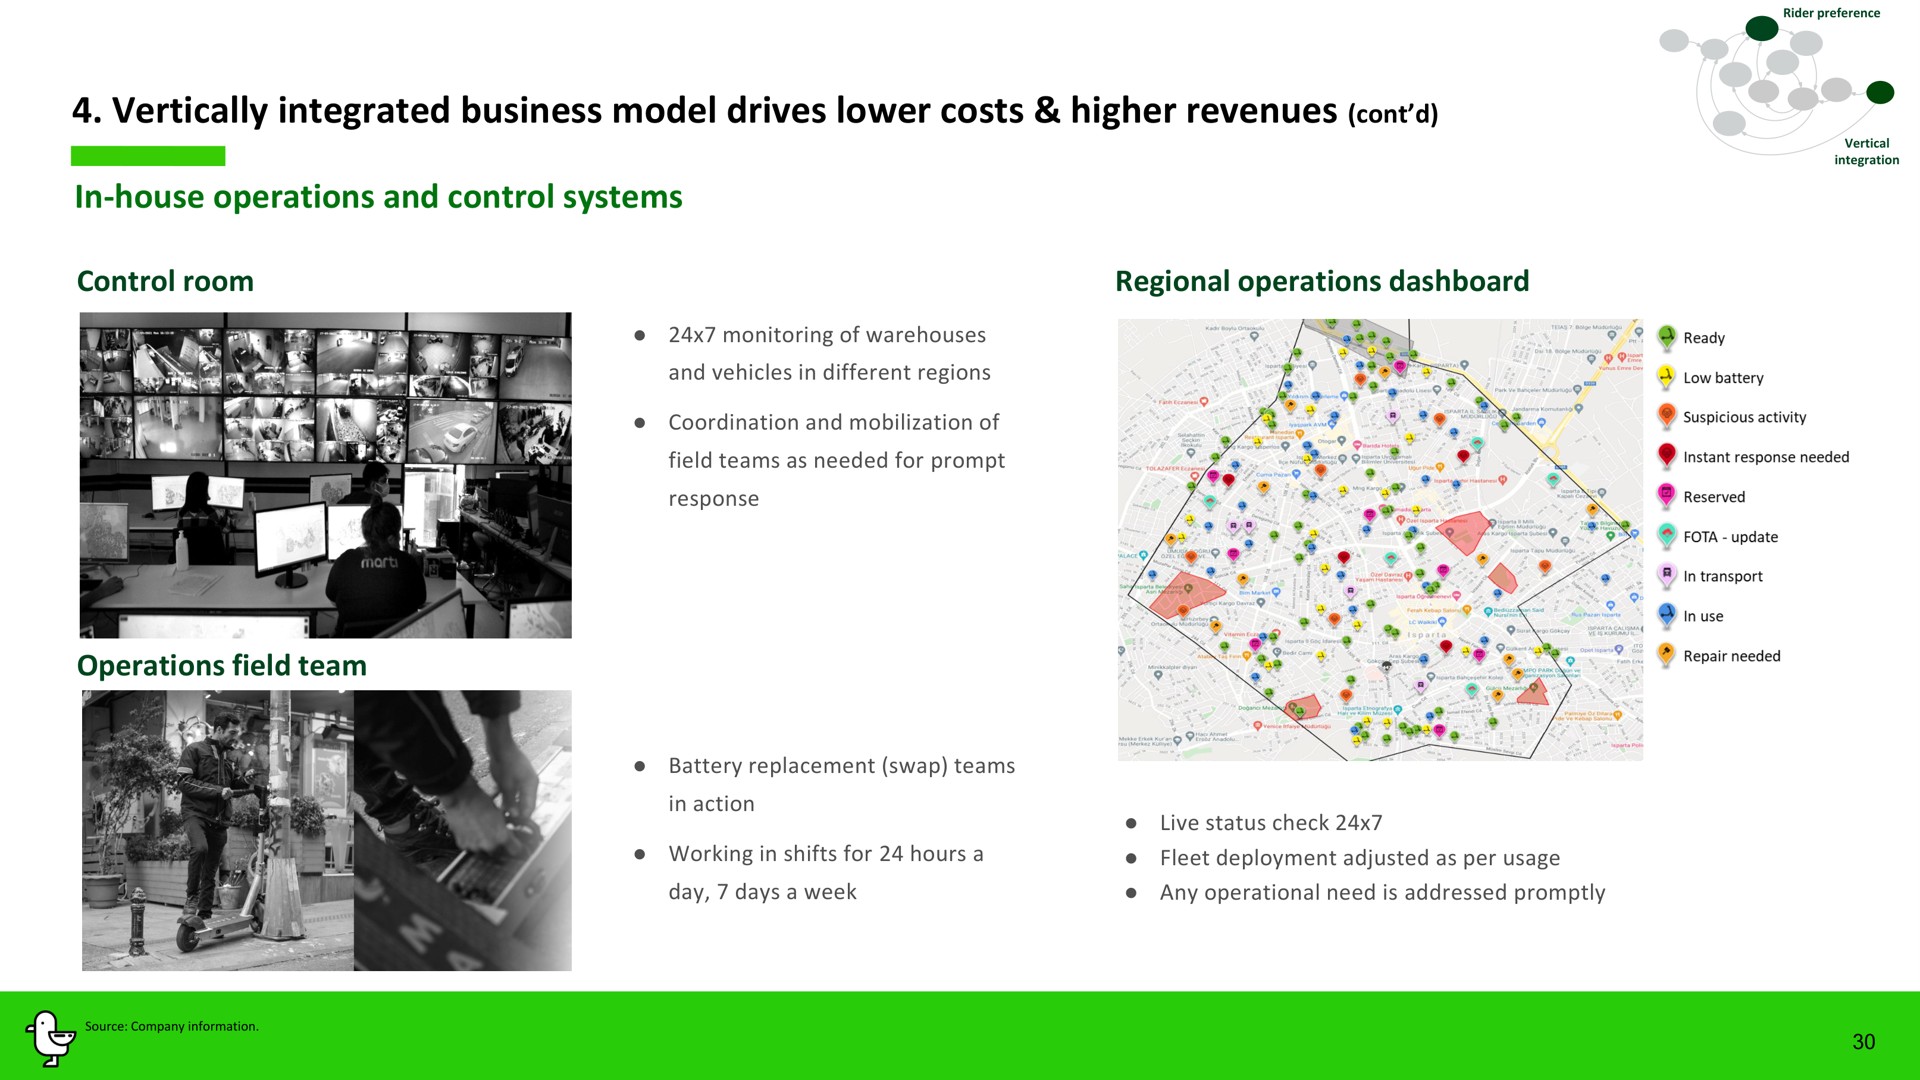 vertically integrated business model drives lower costs higher revenues in house operations and control systems | Marti